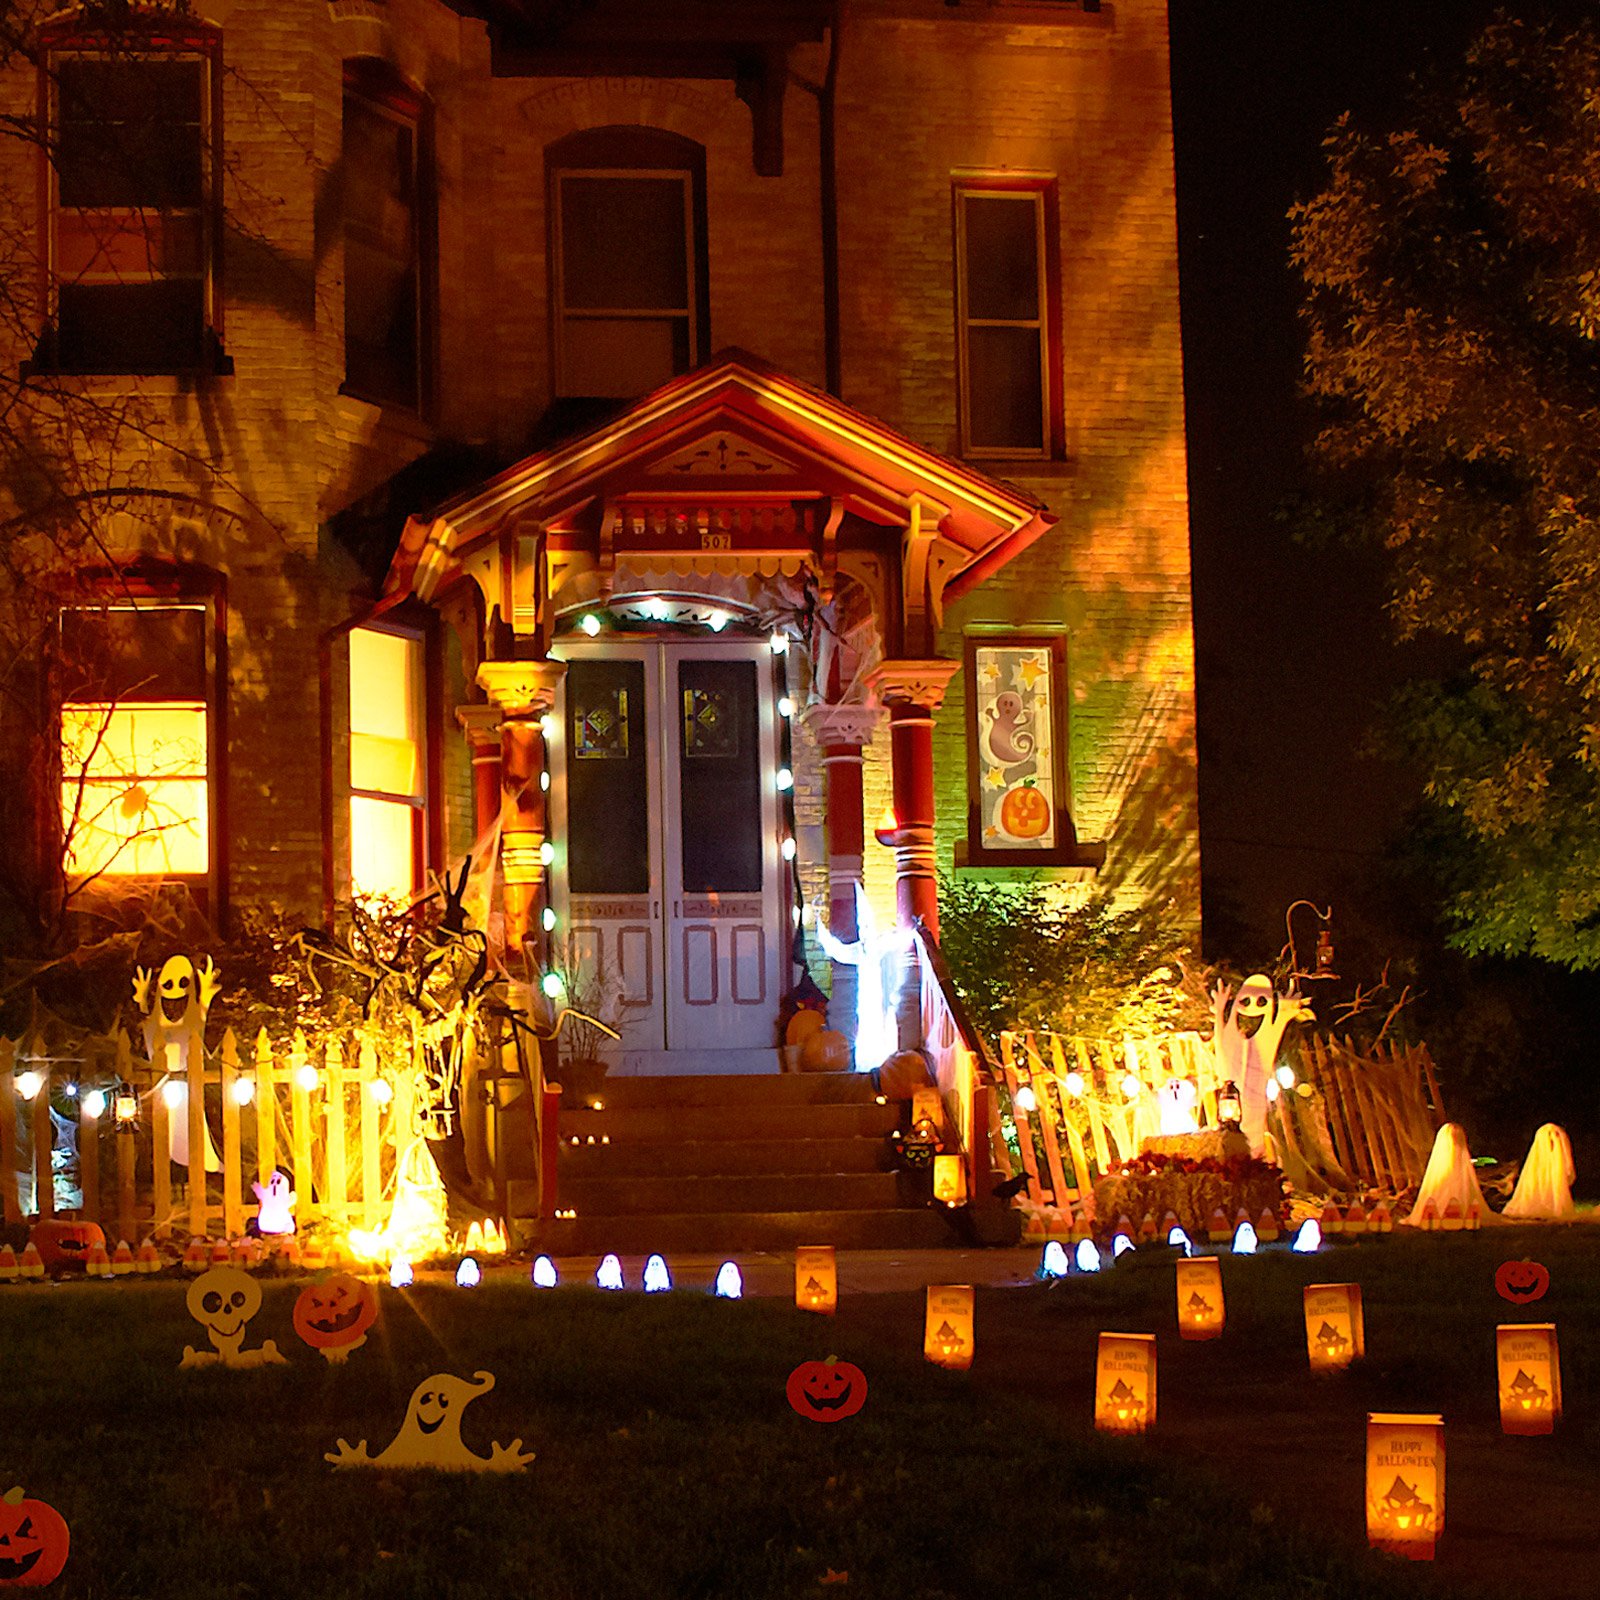 11 Awesome Outdoor Halloween Decoration Ideas - Awesome 11